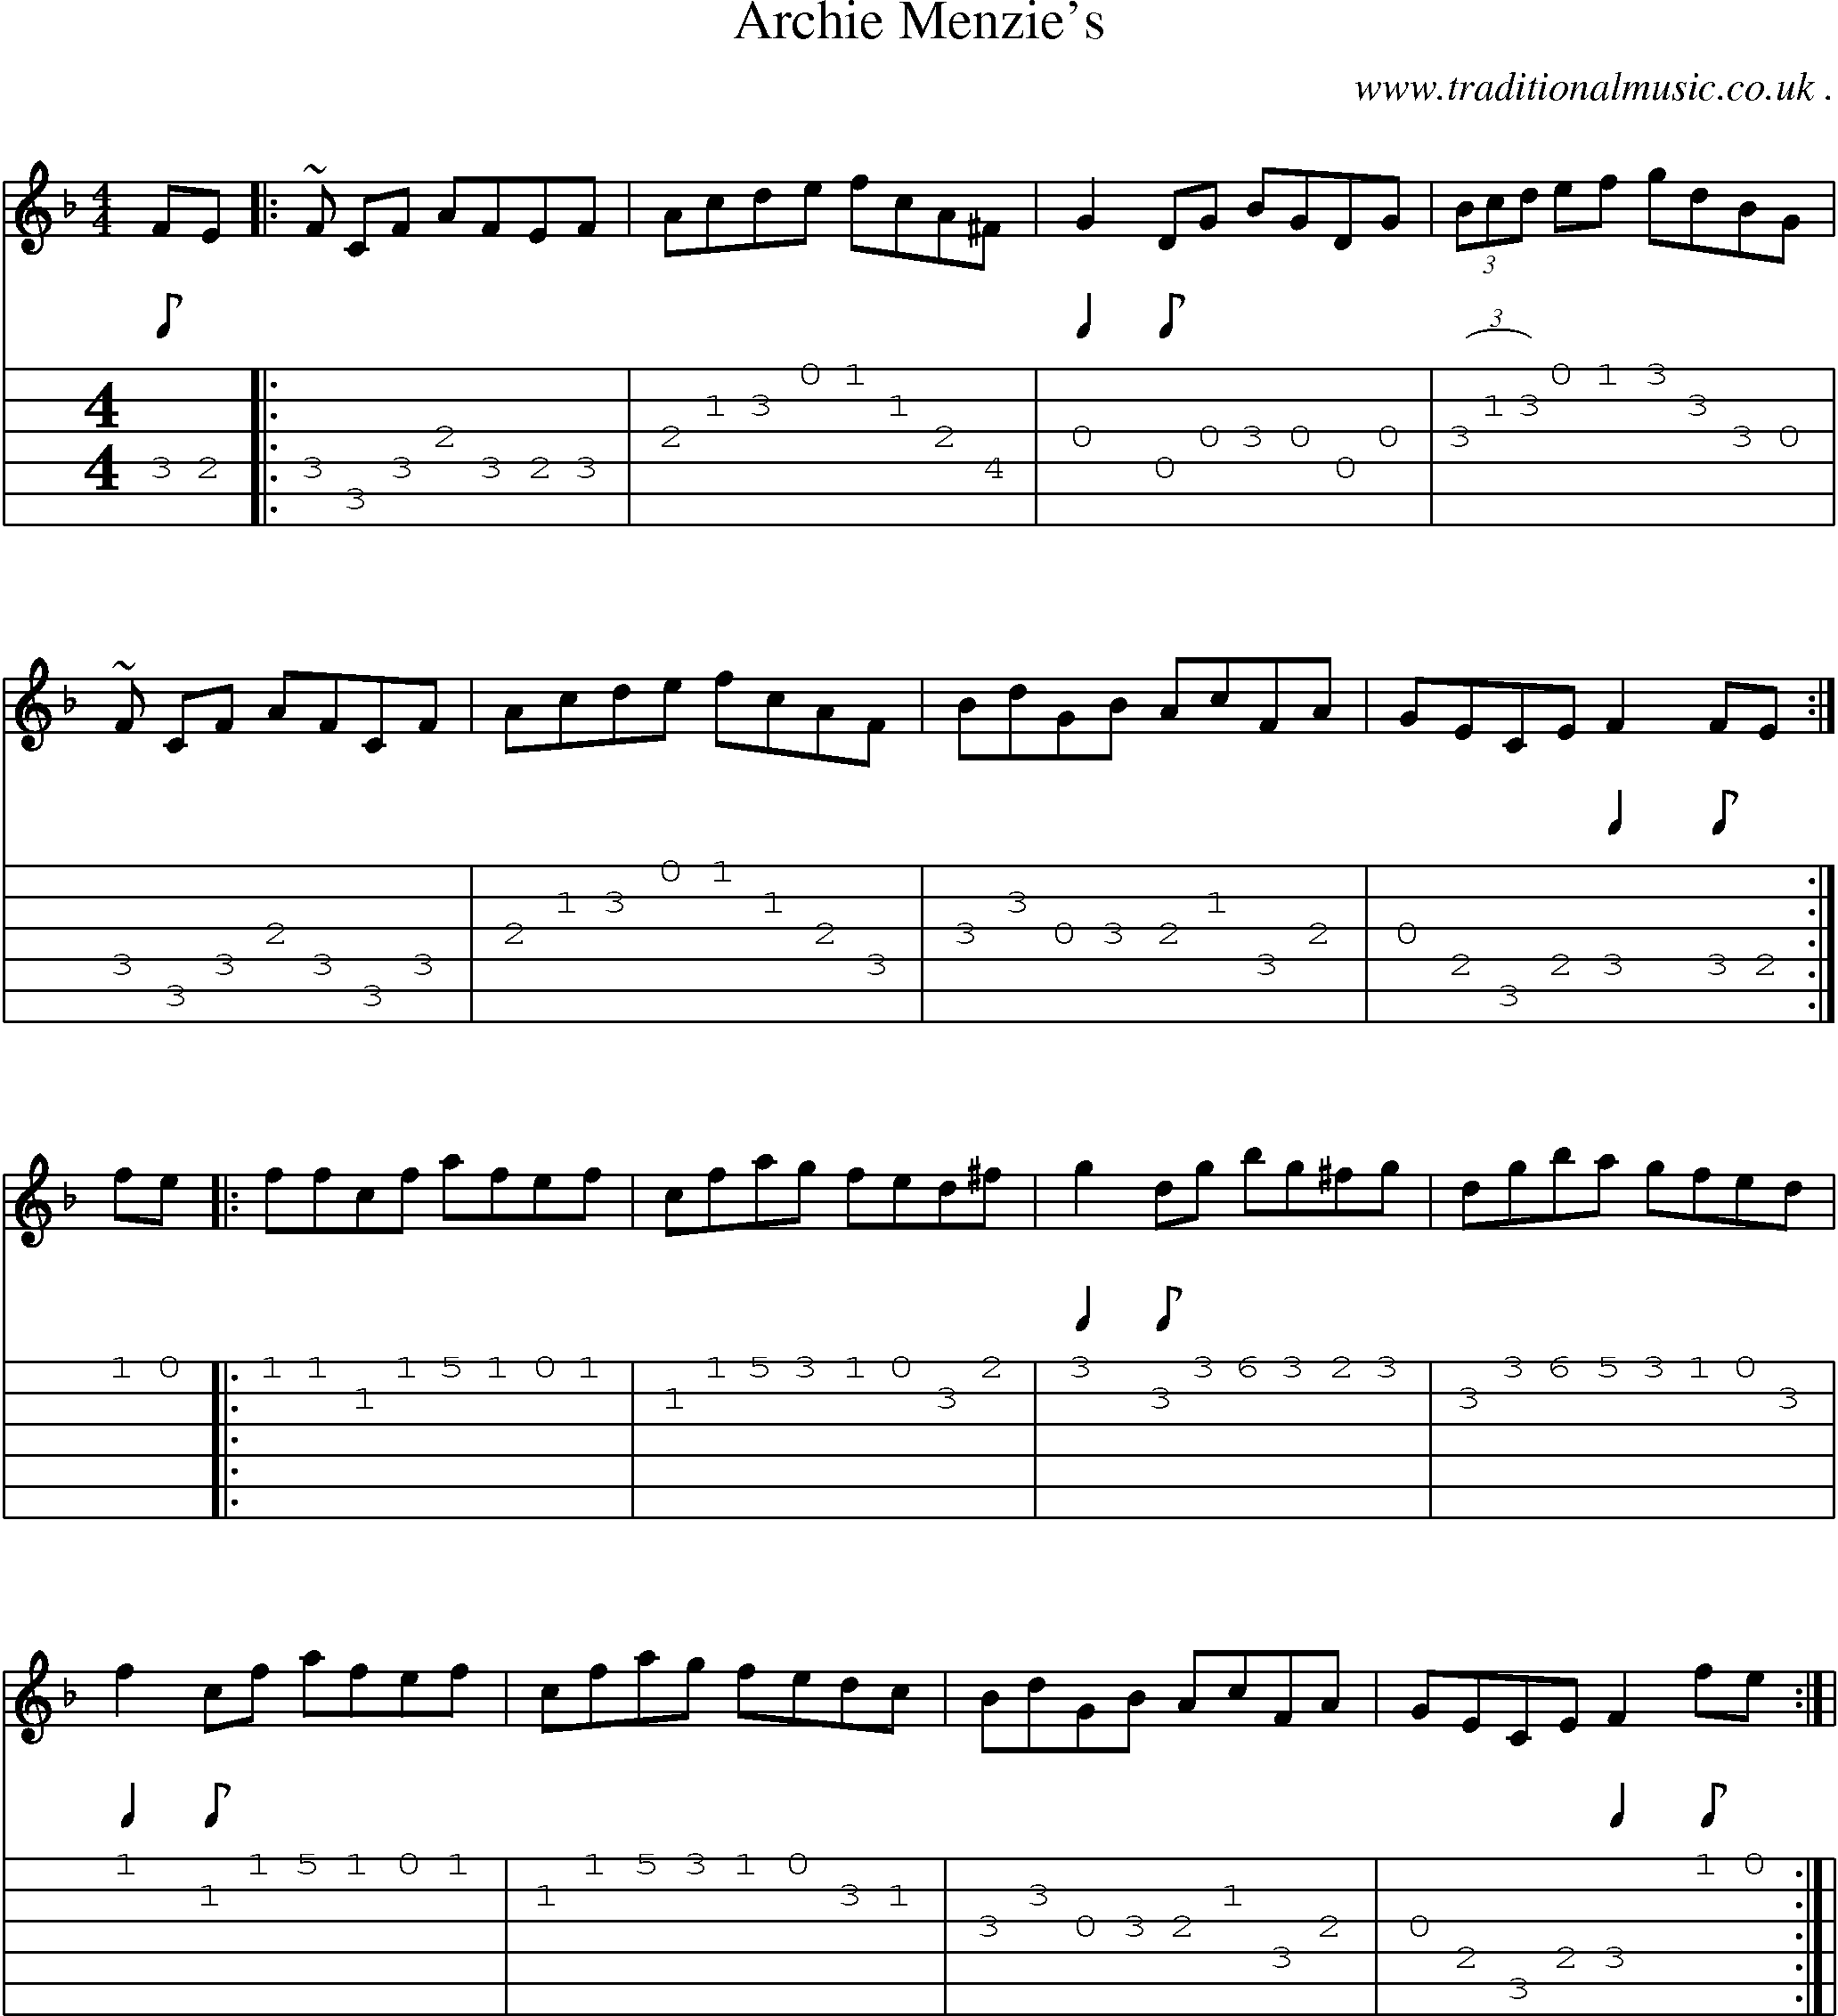 Music Score and Guitar Tabs for Archie Menzies